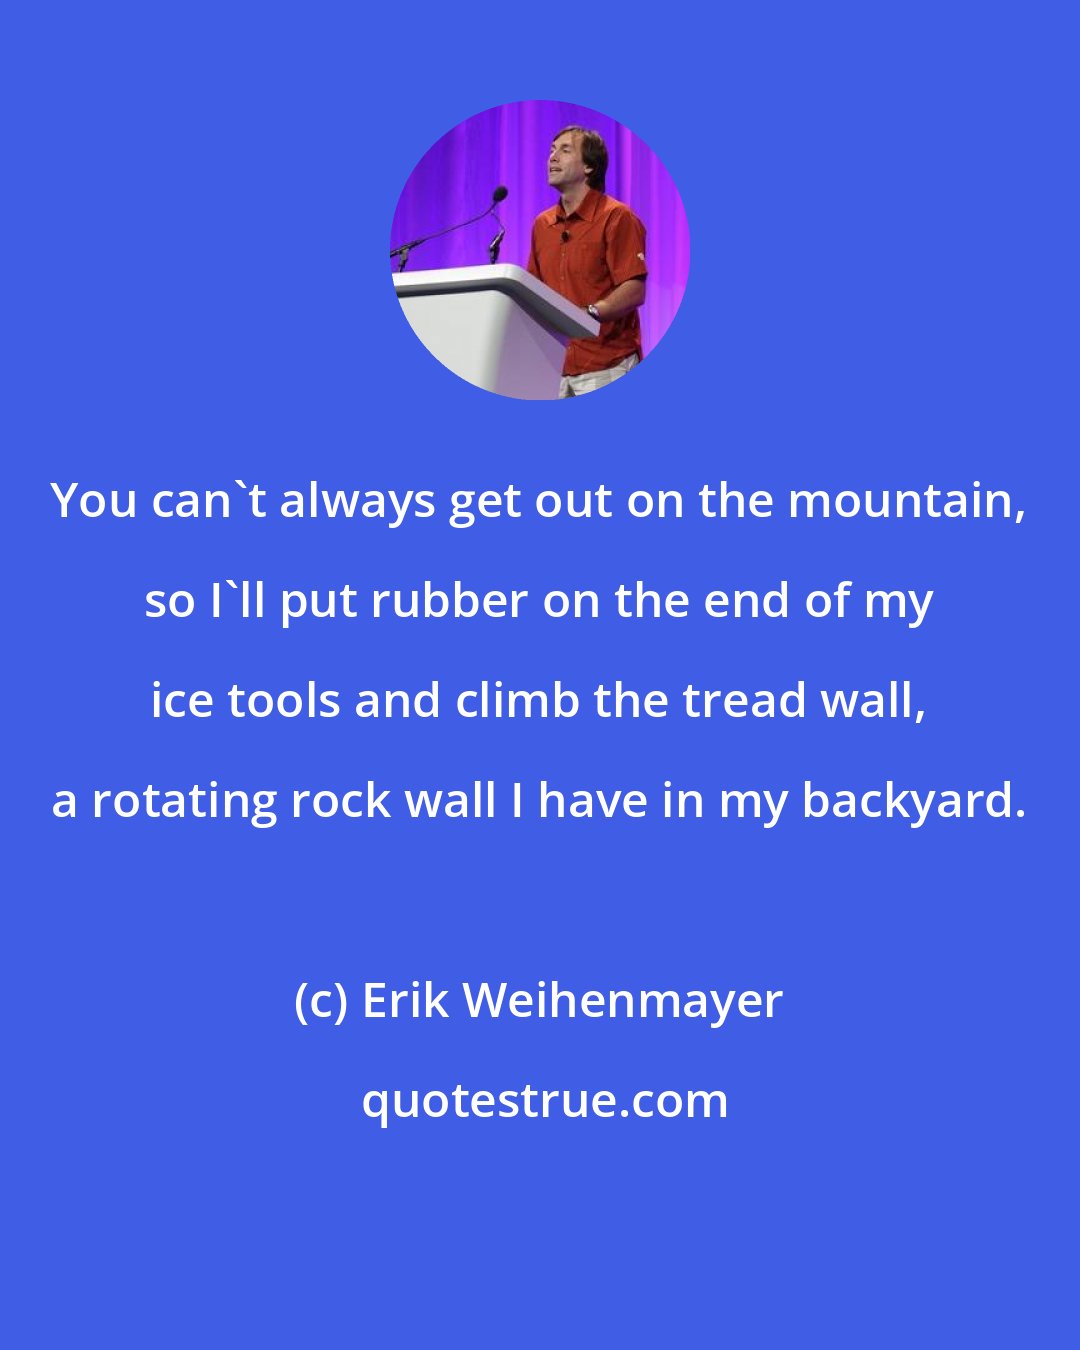 Erik Weihenmayer: You can't always get out on the mountain, so I'll put rubber on the end of my ice tools and climb the tread wall, a rotating rock wall I have in my backyard.